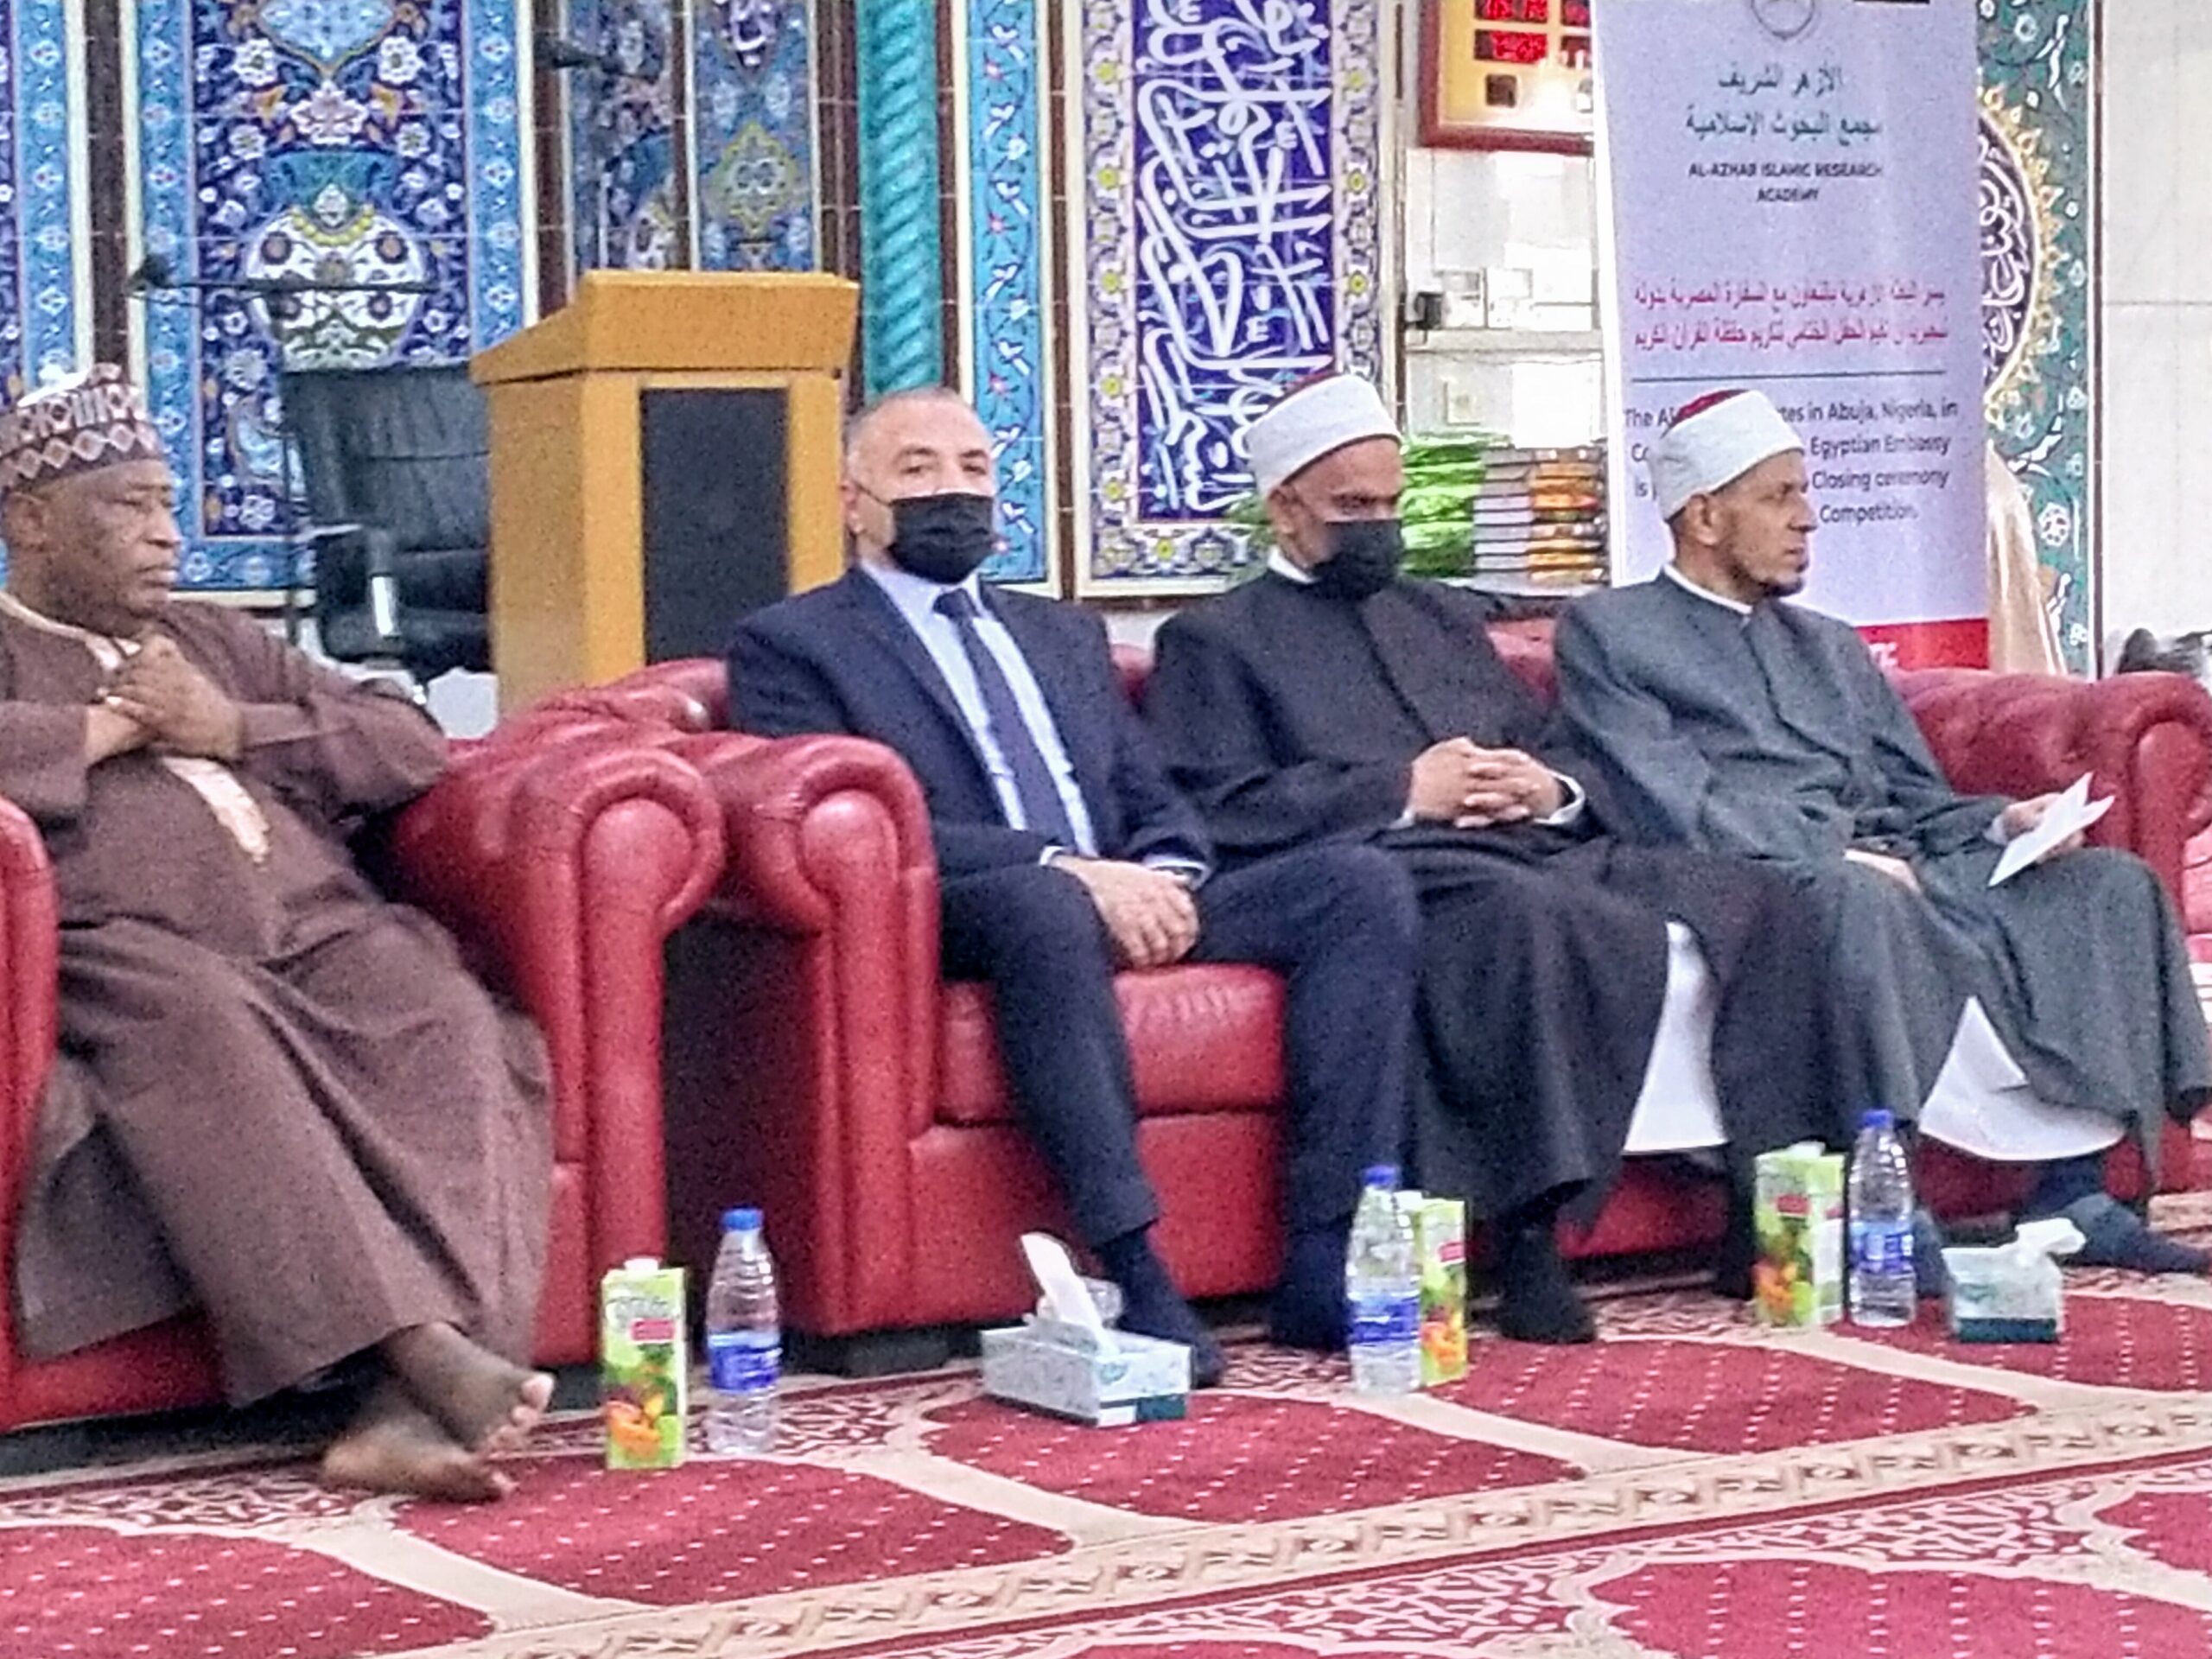 L-R: Director General, International Centre of Islamic Culture and Education (ICICE), Dr. Kabir Kabo Usman; Mr. Ayman Esmat, the Egyptian Consul Secretary; Director, masjid da'wa and education ICICE, Ustadh Abdallah Ahmad; and leader of Al-azhar Shereef mission in Nigeria, Sheikh Assayed El-Hasanain El-Moallim, during the closing ceremony of the Quranic competition on Sunday in Abuja